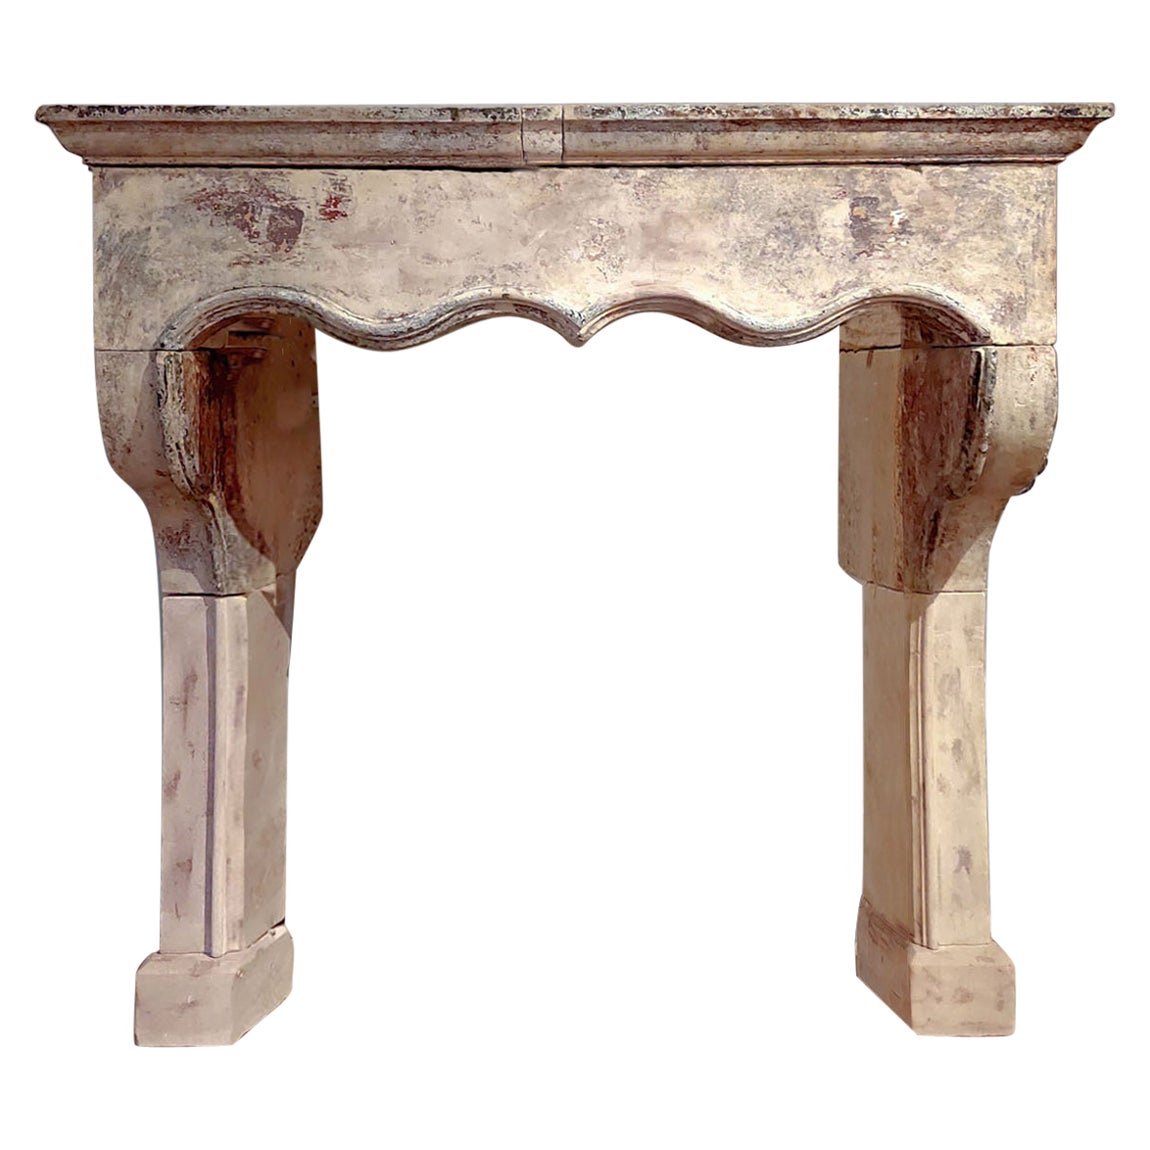 17th Century French Limestone Mantelpiece with Original Paint Remains